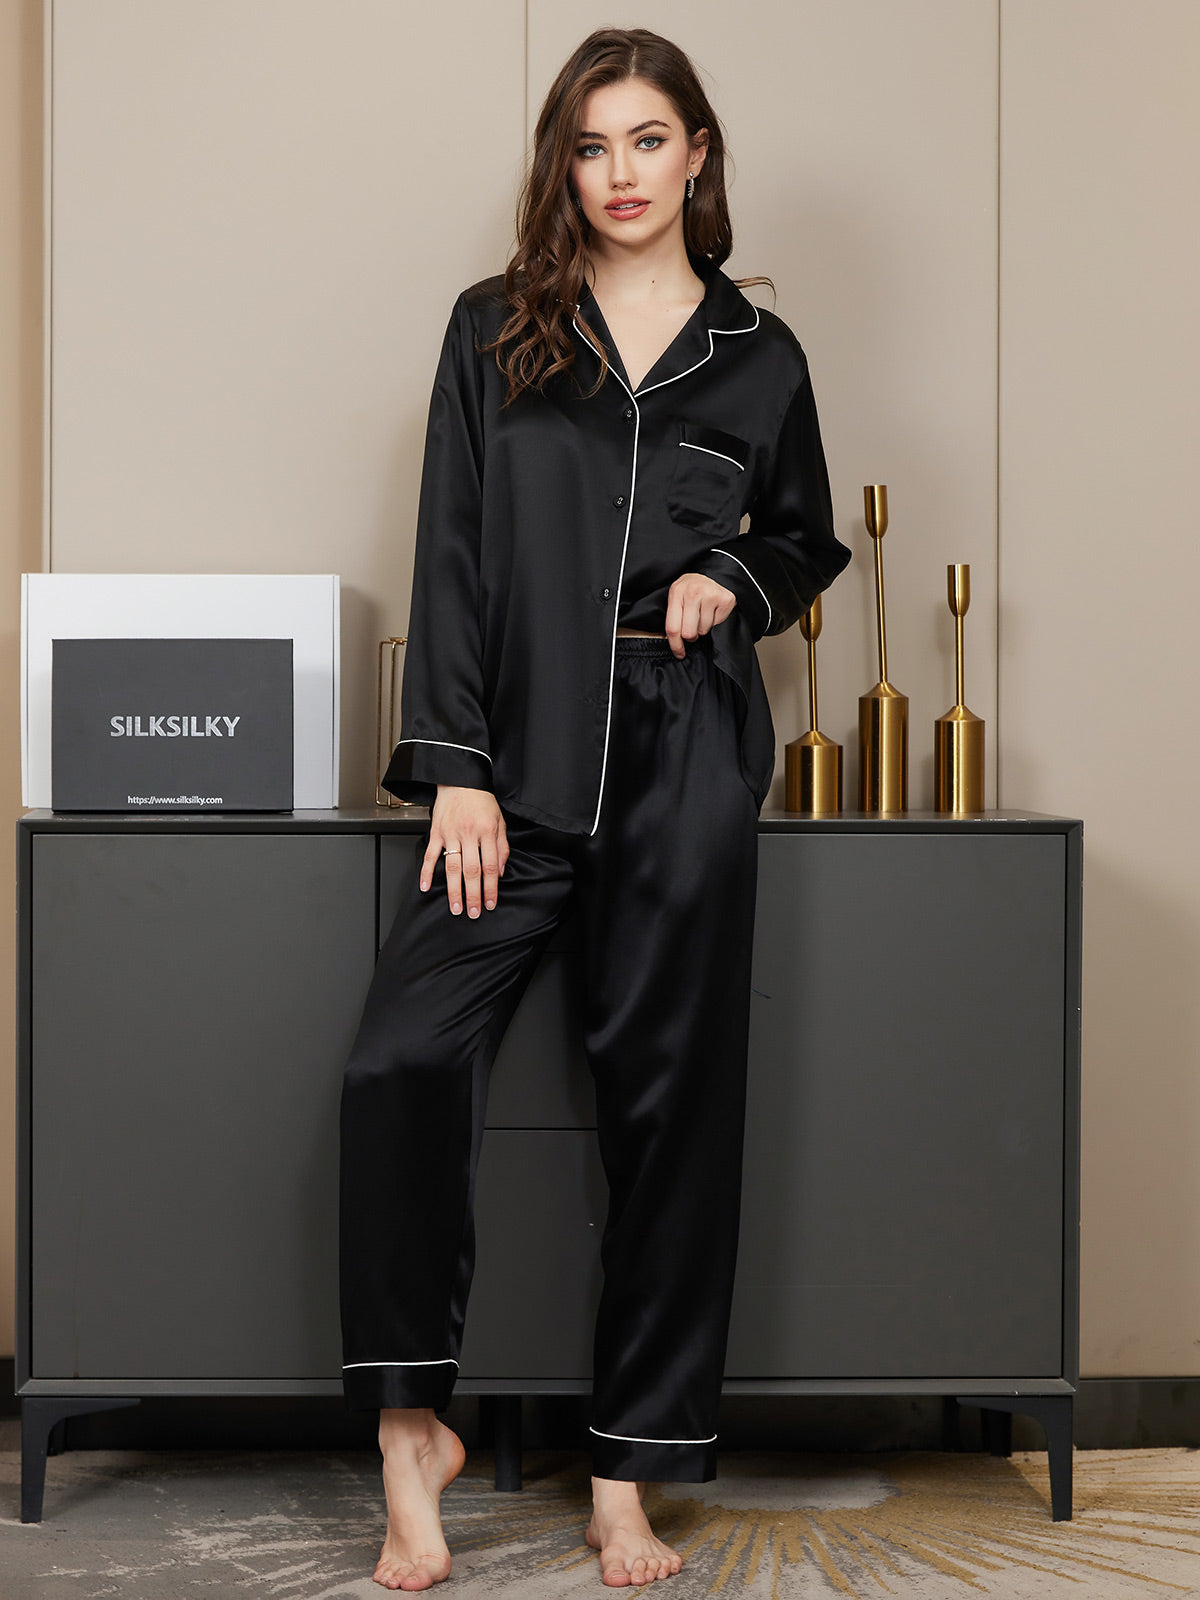 BRM-TZ004 Women's Classic Pure Silk Pajamas 100% Washable Silk Sleepwear, The Best Anniversary Gifts for Her, Black / M